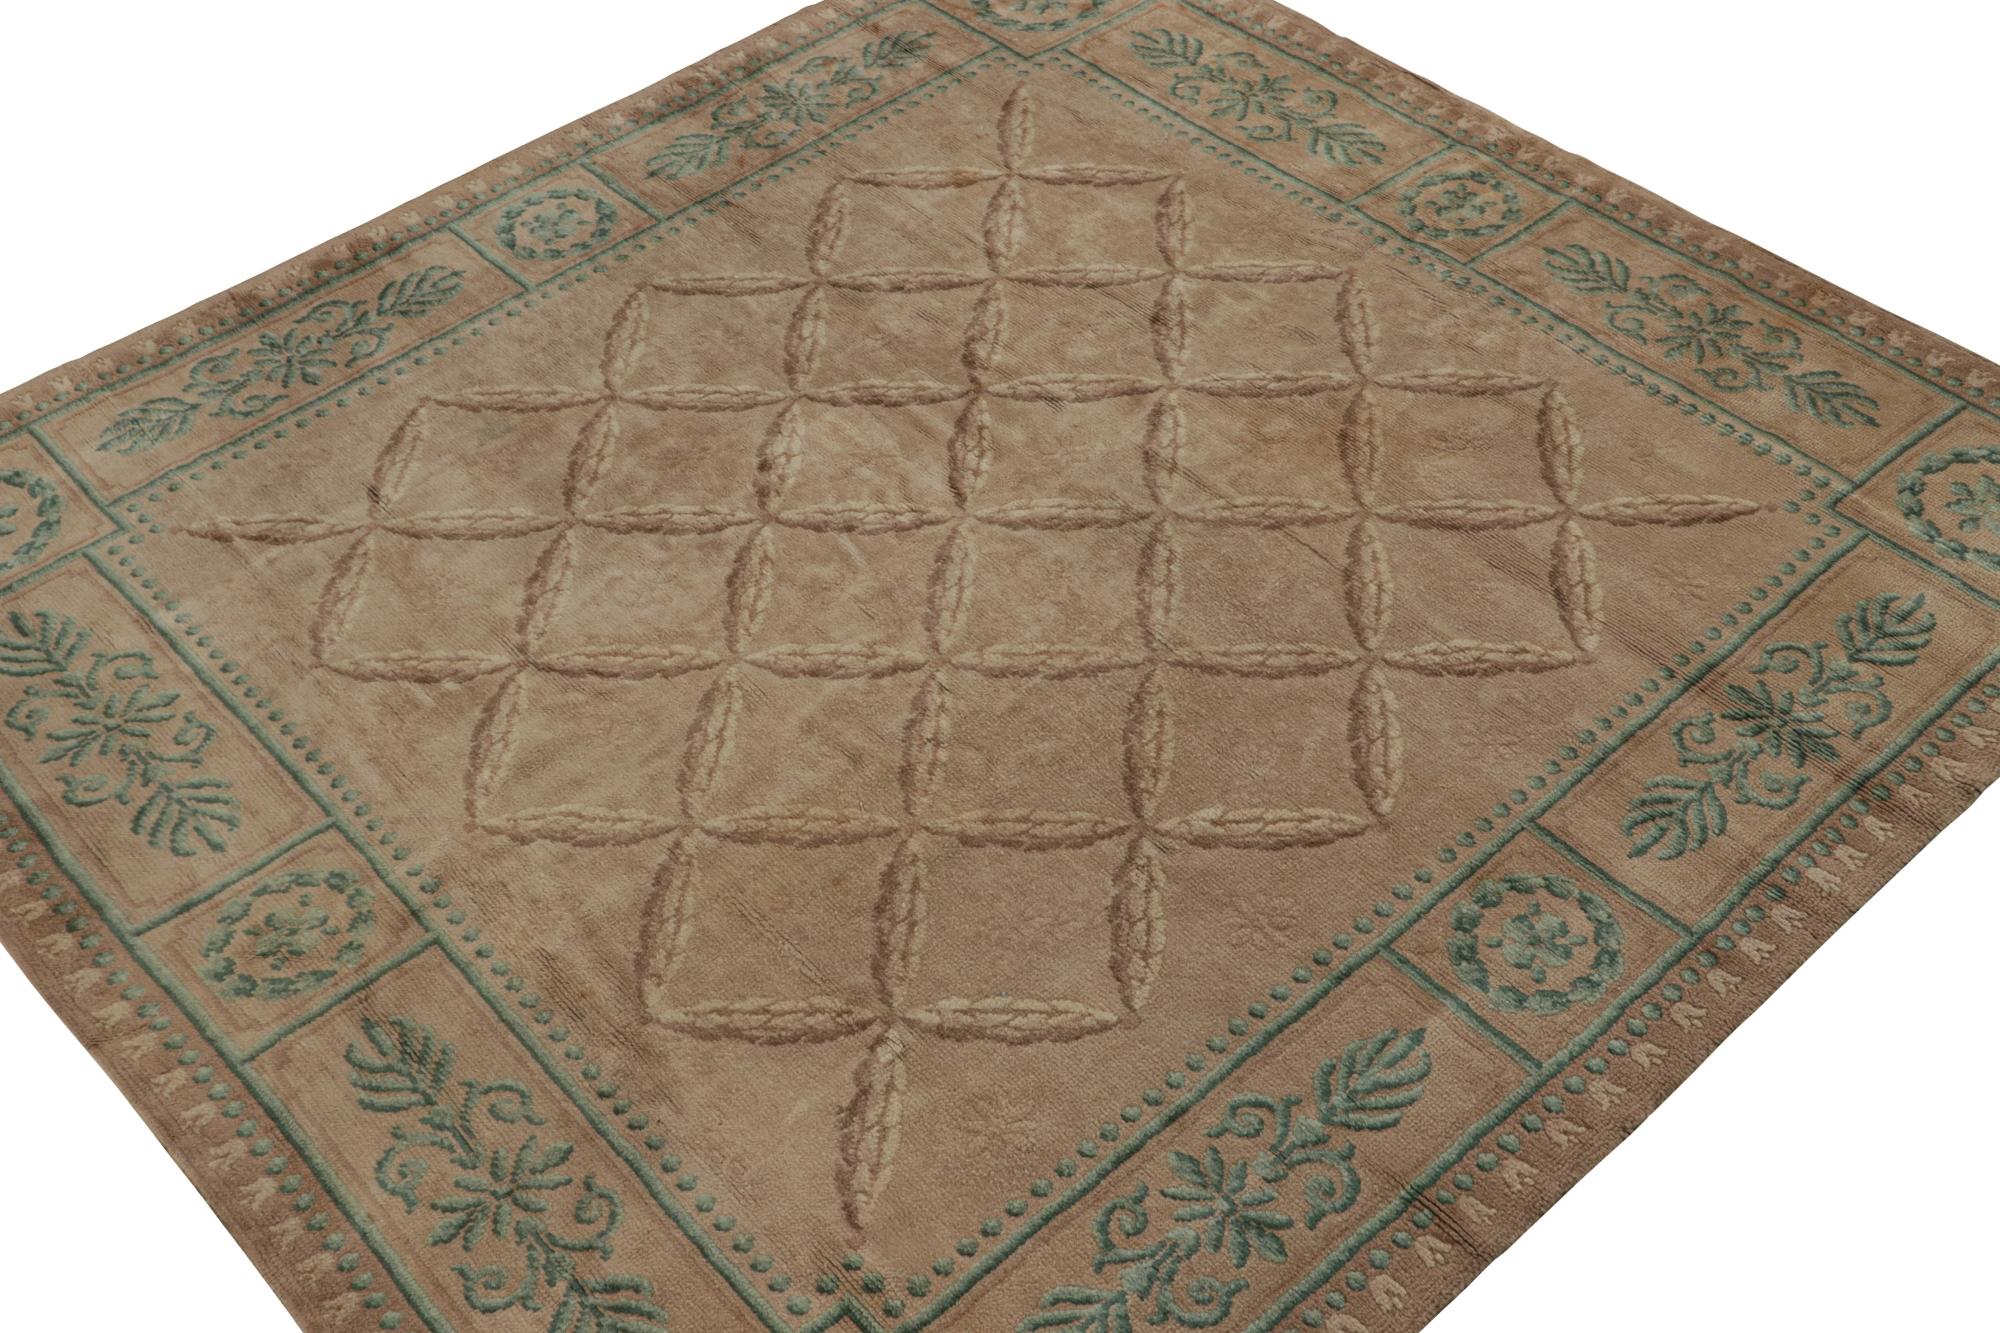 Hand-Knotted  Antique Savonnerie Rug in Beige-Brown & Green Floral Patterns For Sale